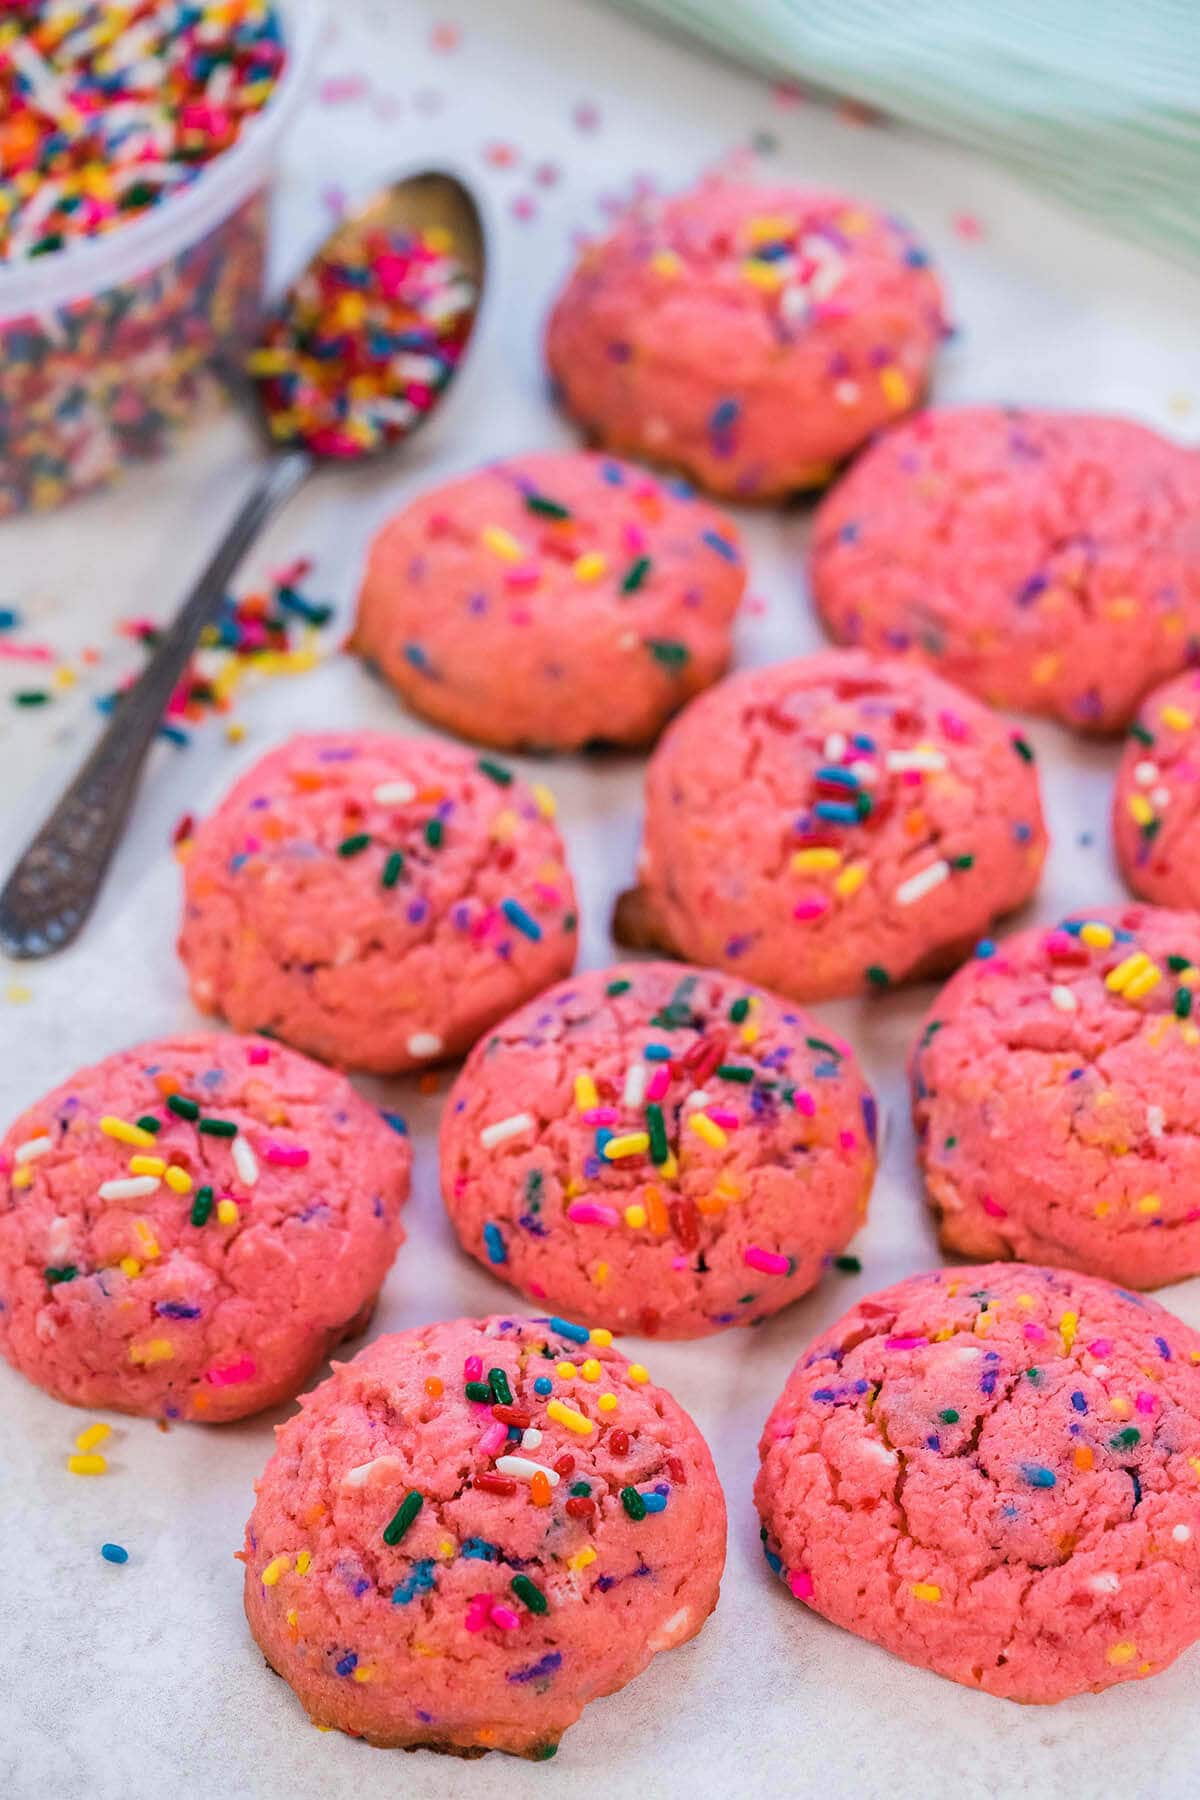 Biscuits on plate surrounded by sprinkles.